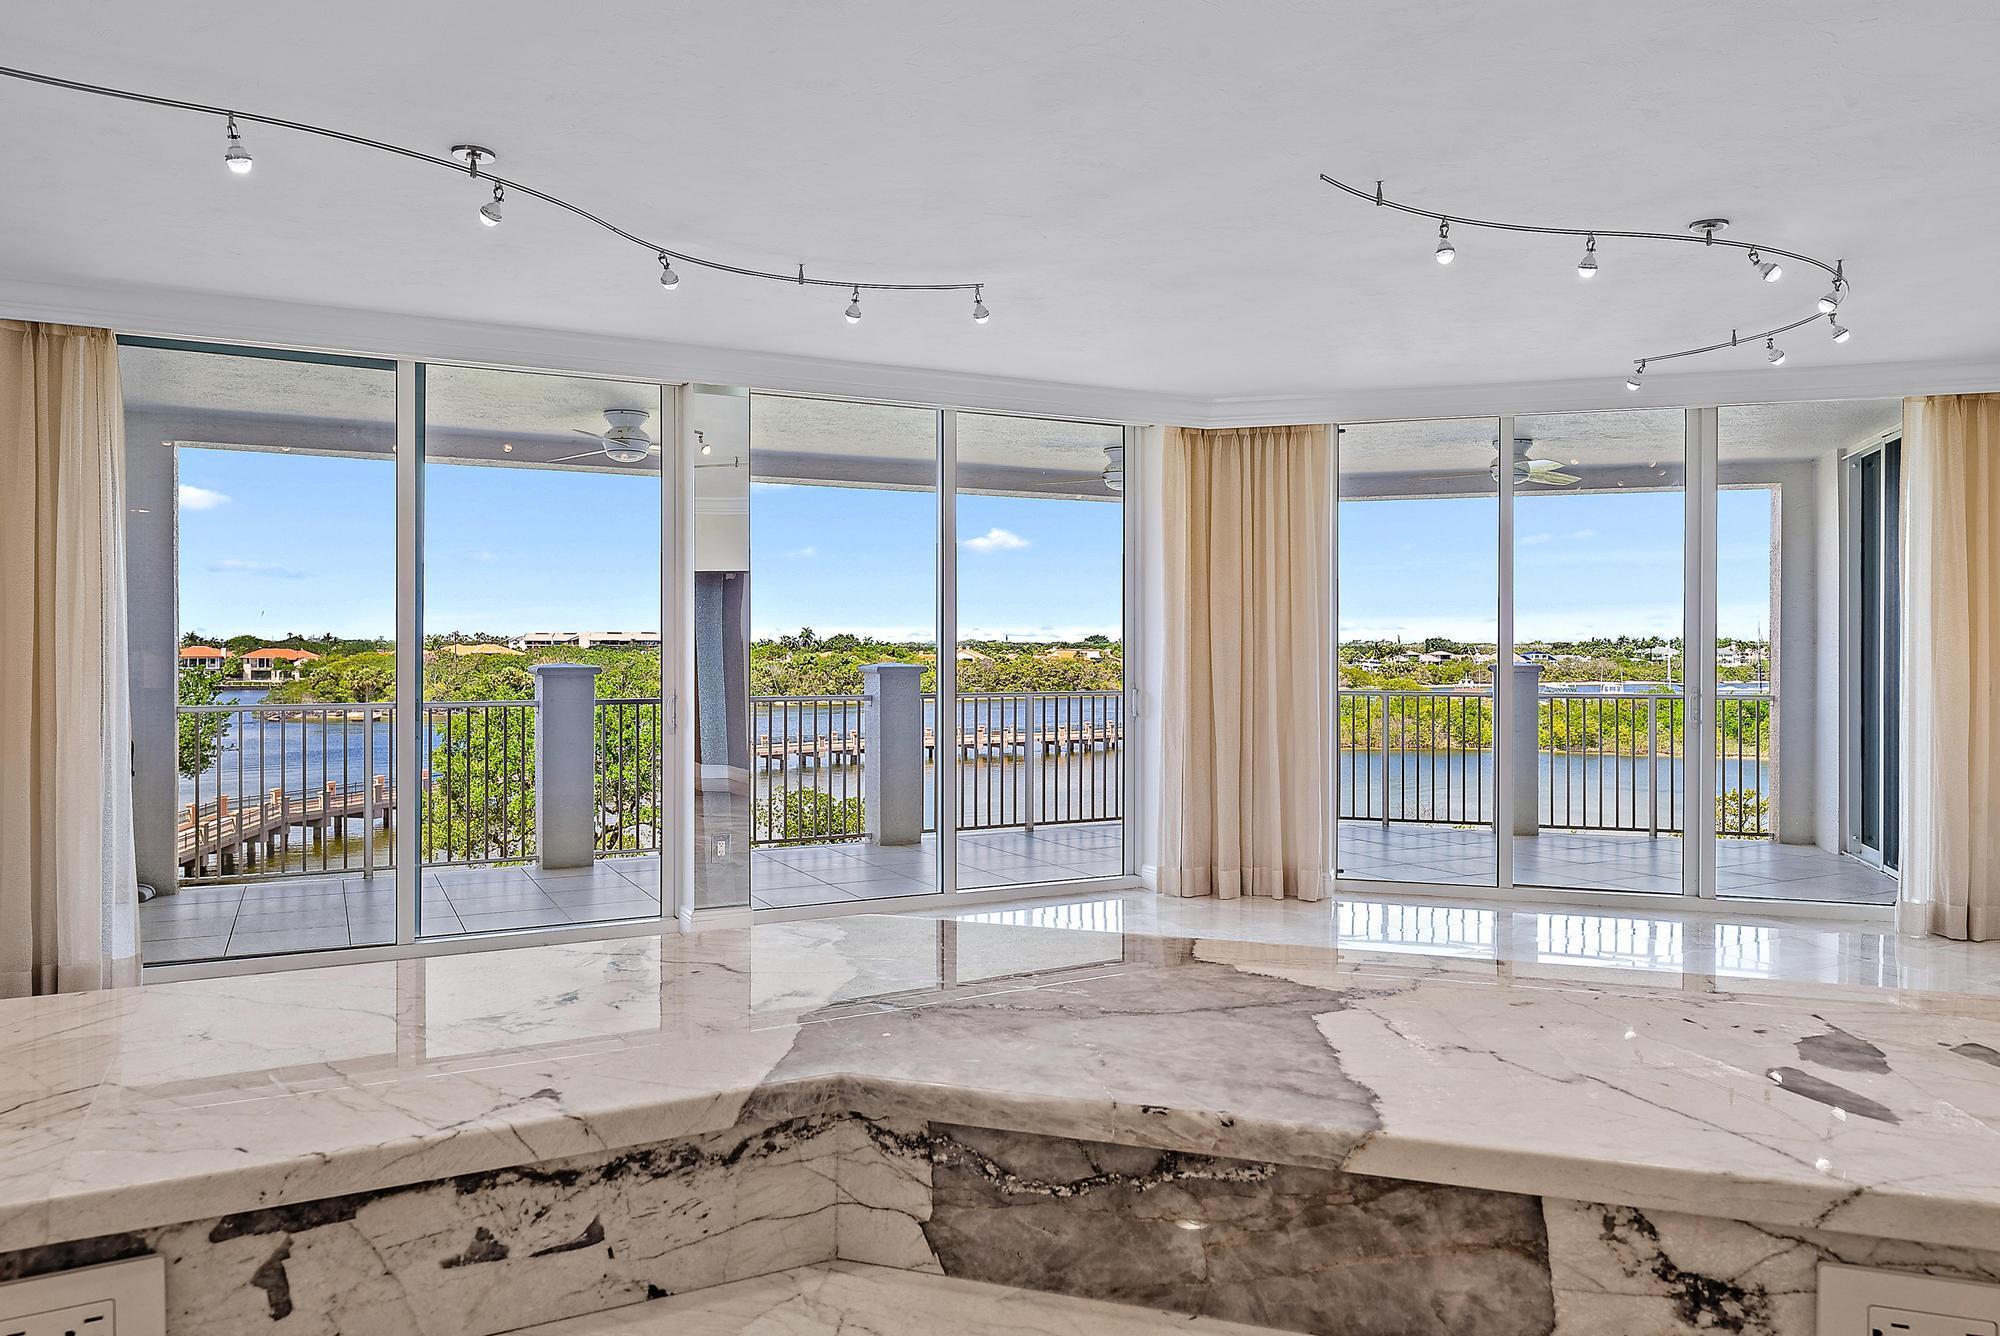 This very sought after Garwood model in the Anchorage Building at the prestigious Jupiter Yacht Club, features a den in addition to the primary suite and the two guest bedrooms. The den could be an office or serve as a fourth bedroom! This is also the floorplan with the largest, open-layout kitchen. North-west exposure with captivating views of the Intracoastal waterway and sensational sunsets. Residents of the Anchorage Building have exclusive access to first class amenities incl. a heated salt-water pool, poolside summer kitchen, a gym, a social room, a movie theatre, a library, a gated dog park, a manned front gate and two garage spaces. Boat slips in the protected JYC Marina can be leased or purchased. The Jupiter Yacht Club retains the value of peaceful living, while being convenient